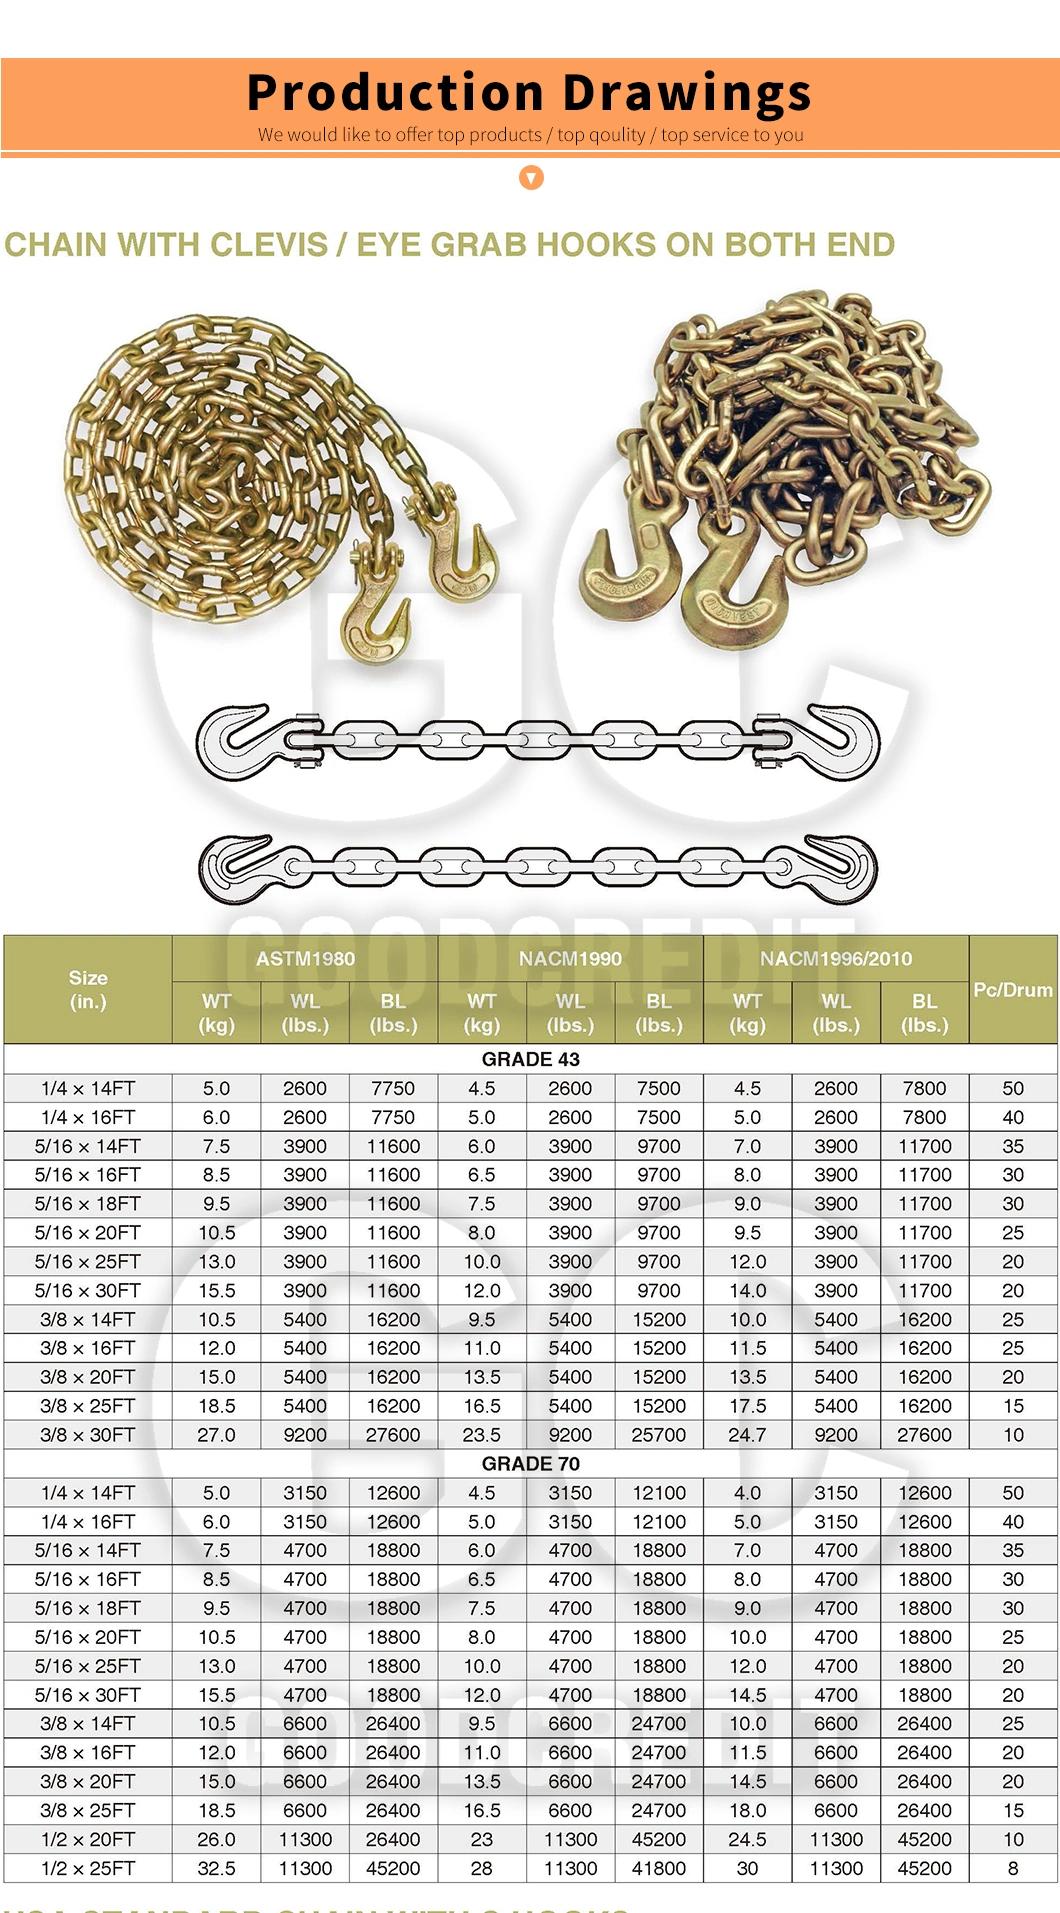 Factory Grade 70 Grade 80 Yellow Zinc Plated Binder Chain with Clevis Hook